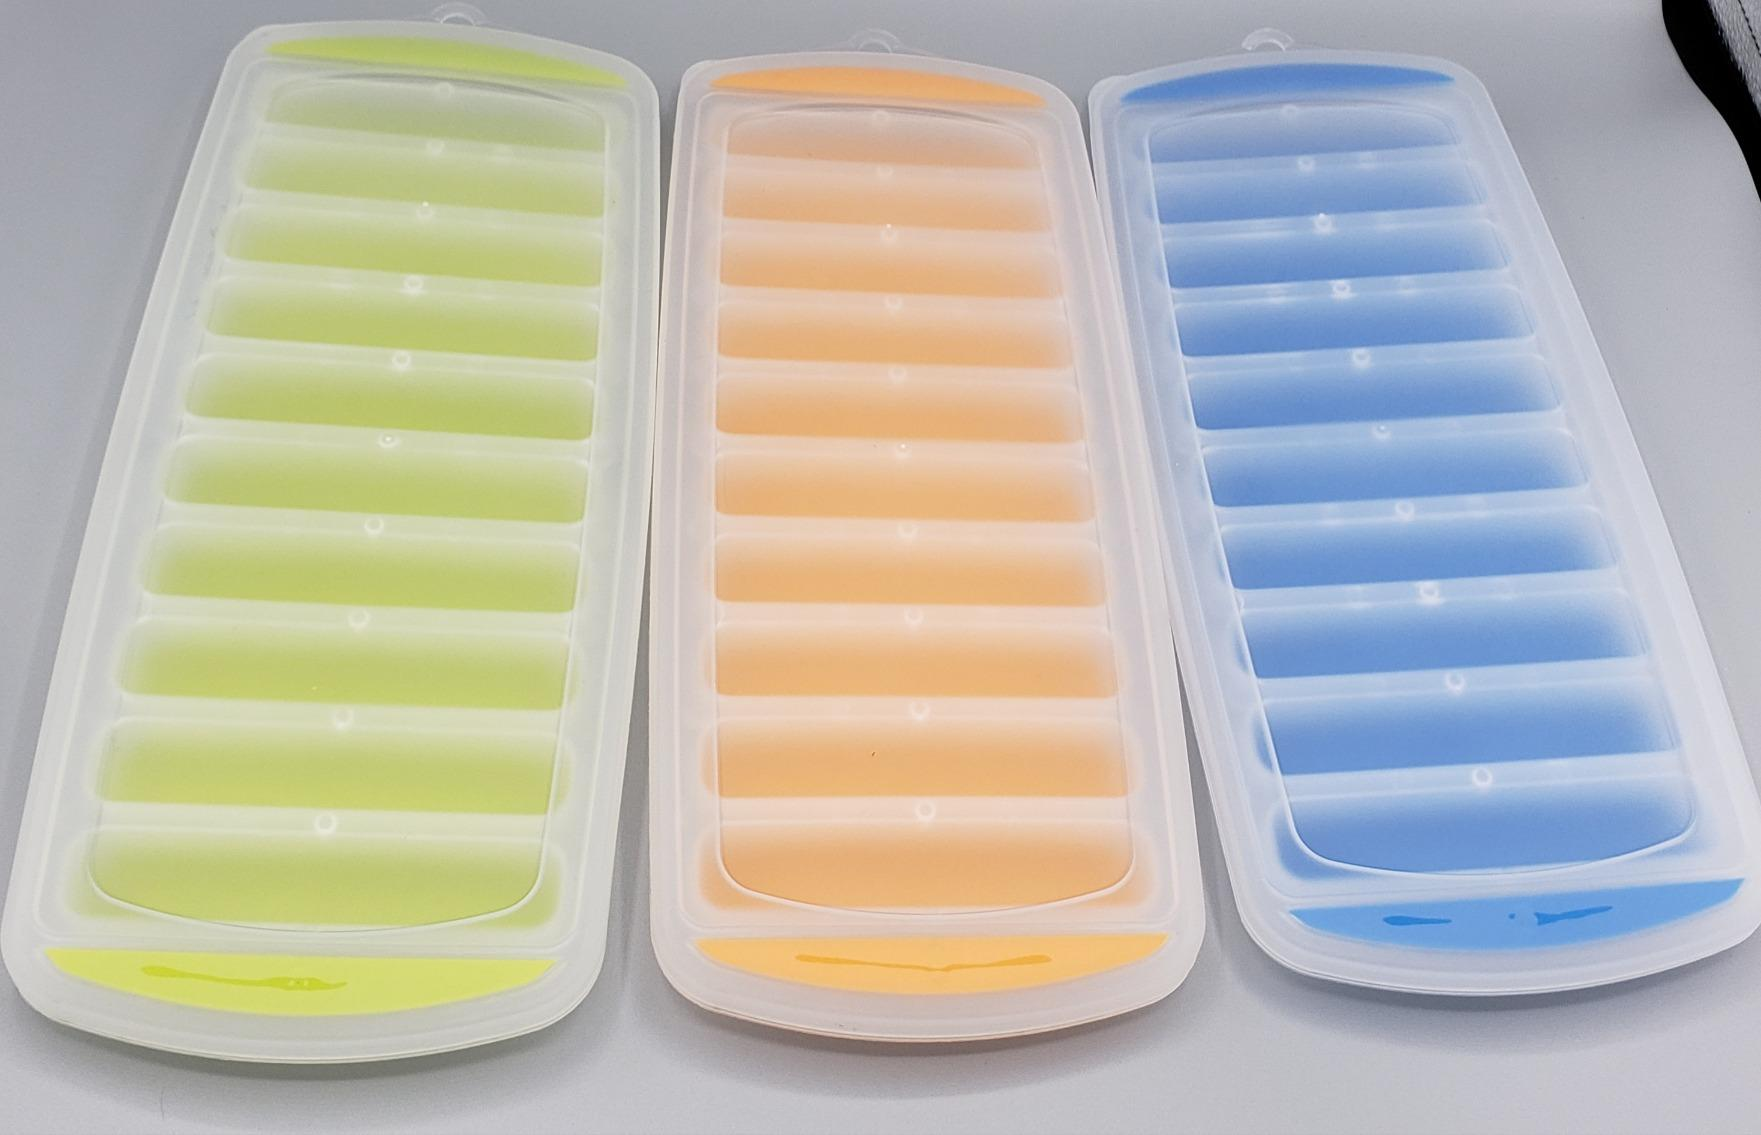 Long Thumb Lattice Silicone Strip Biscuit Mould Ice Cube DIY Mold Tray MN 